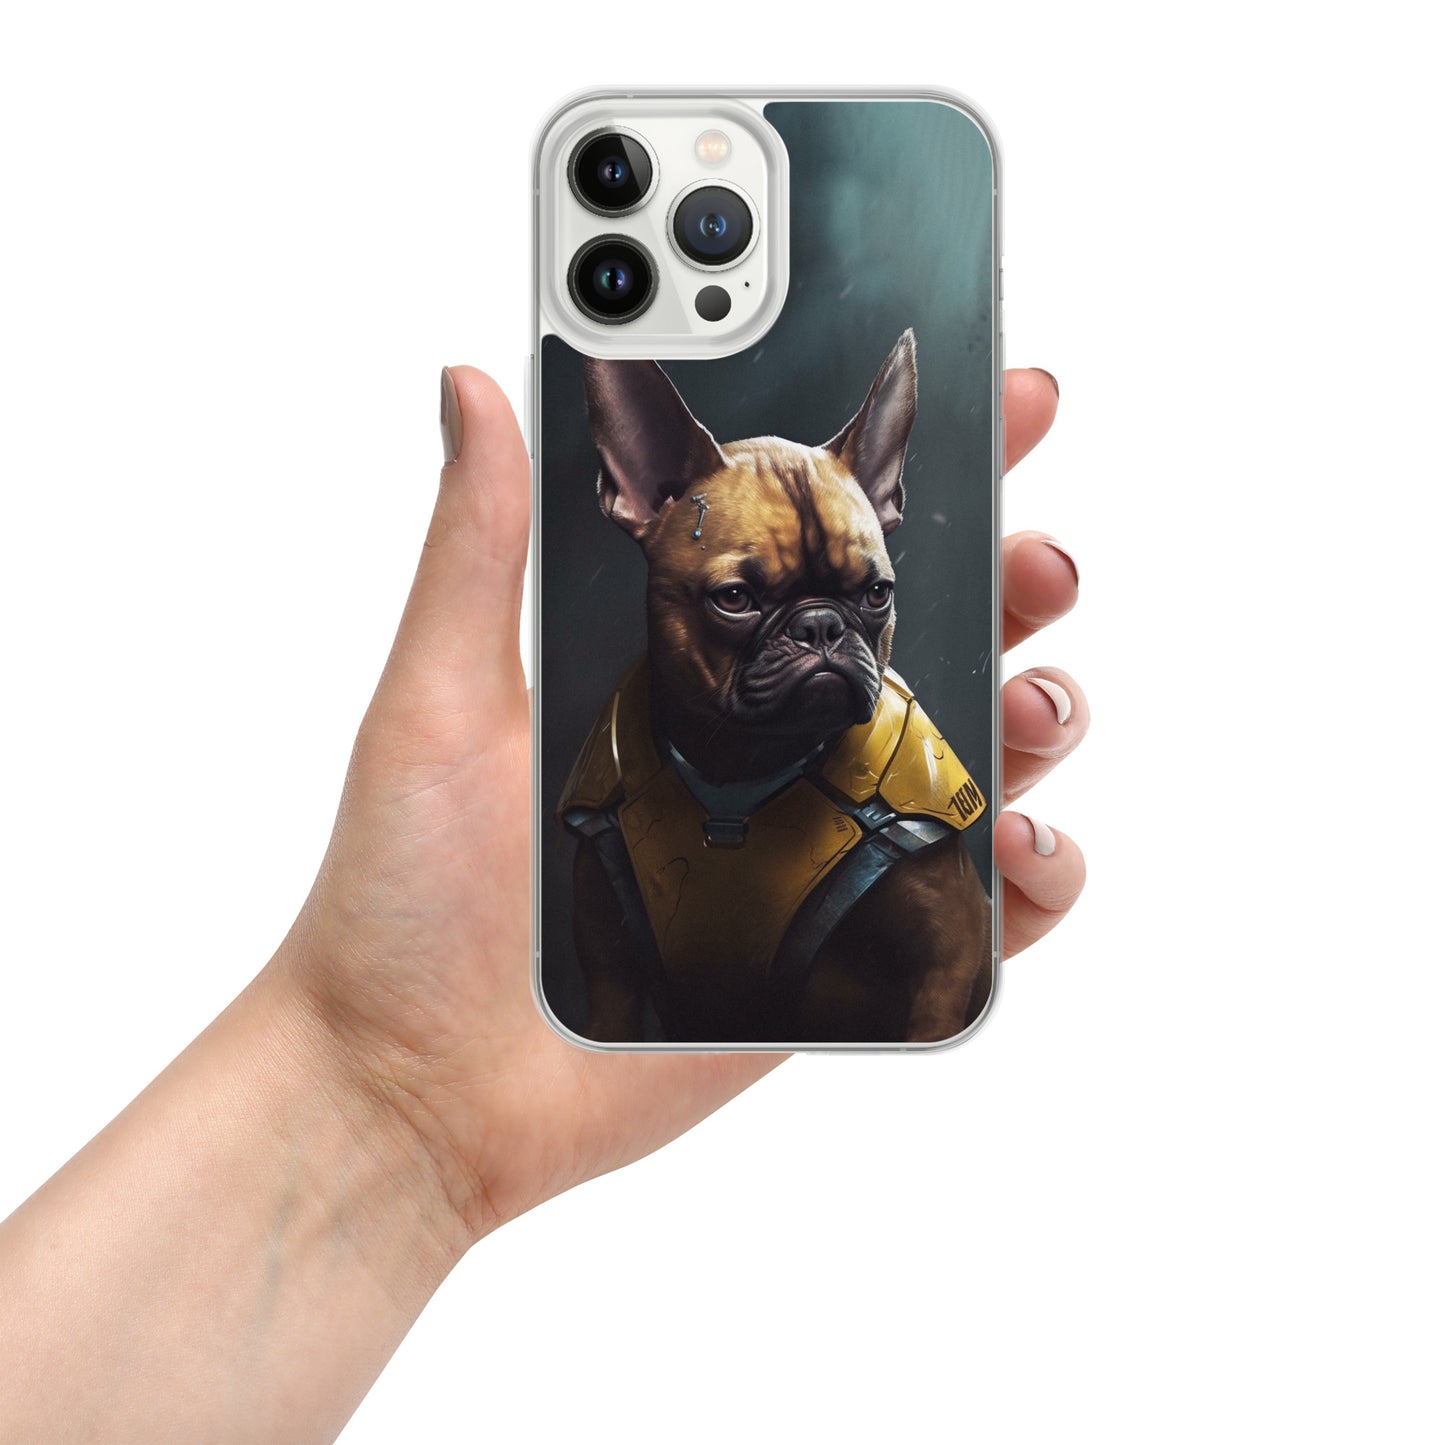 Chic Frenchie Illustrated iPhone Case - Ideal Present for Canine Aficionados